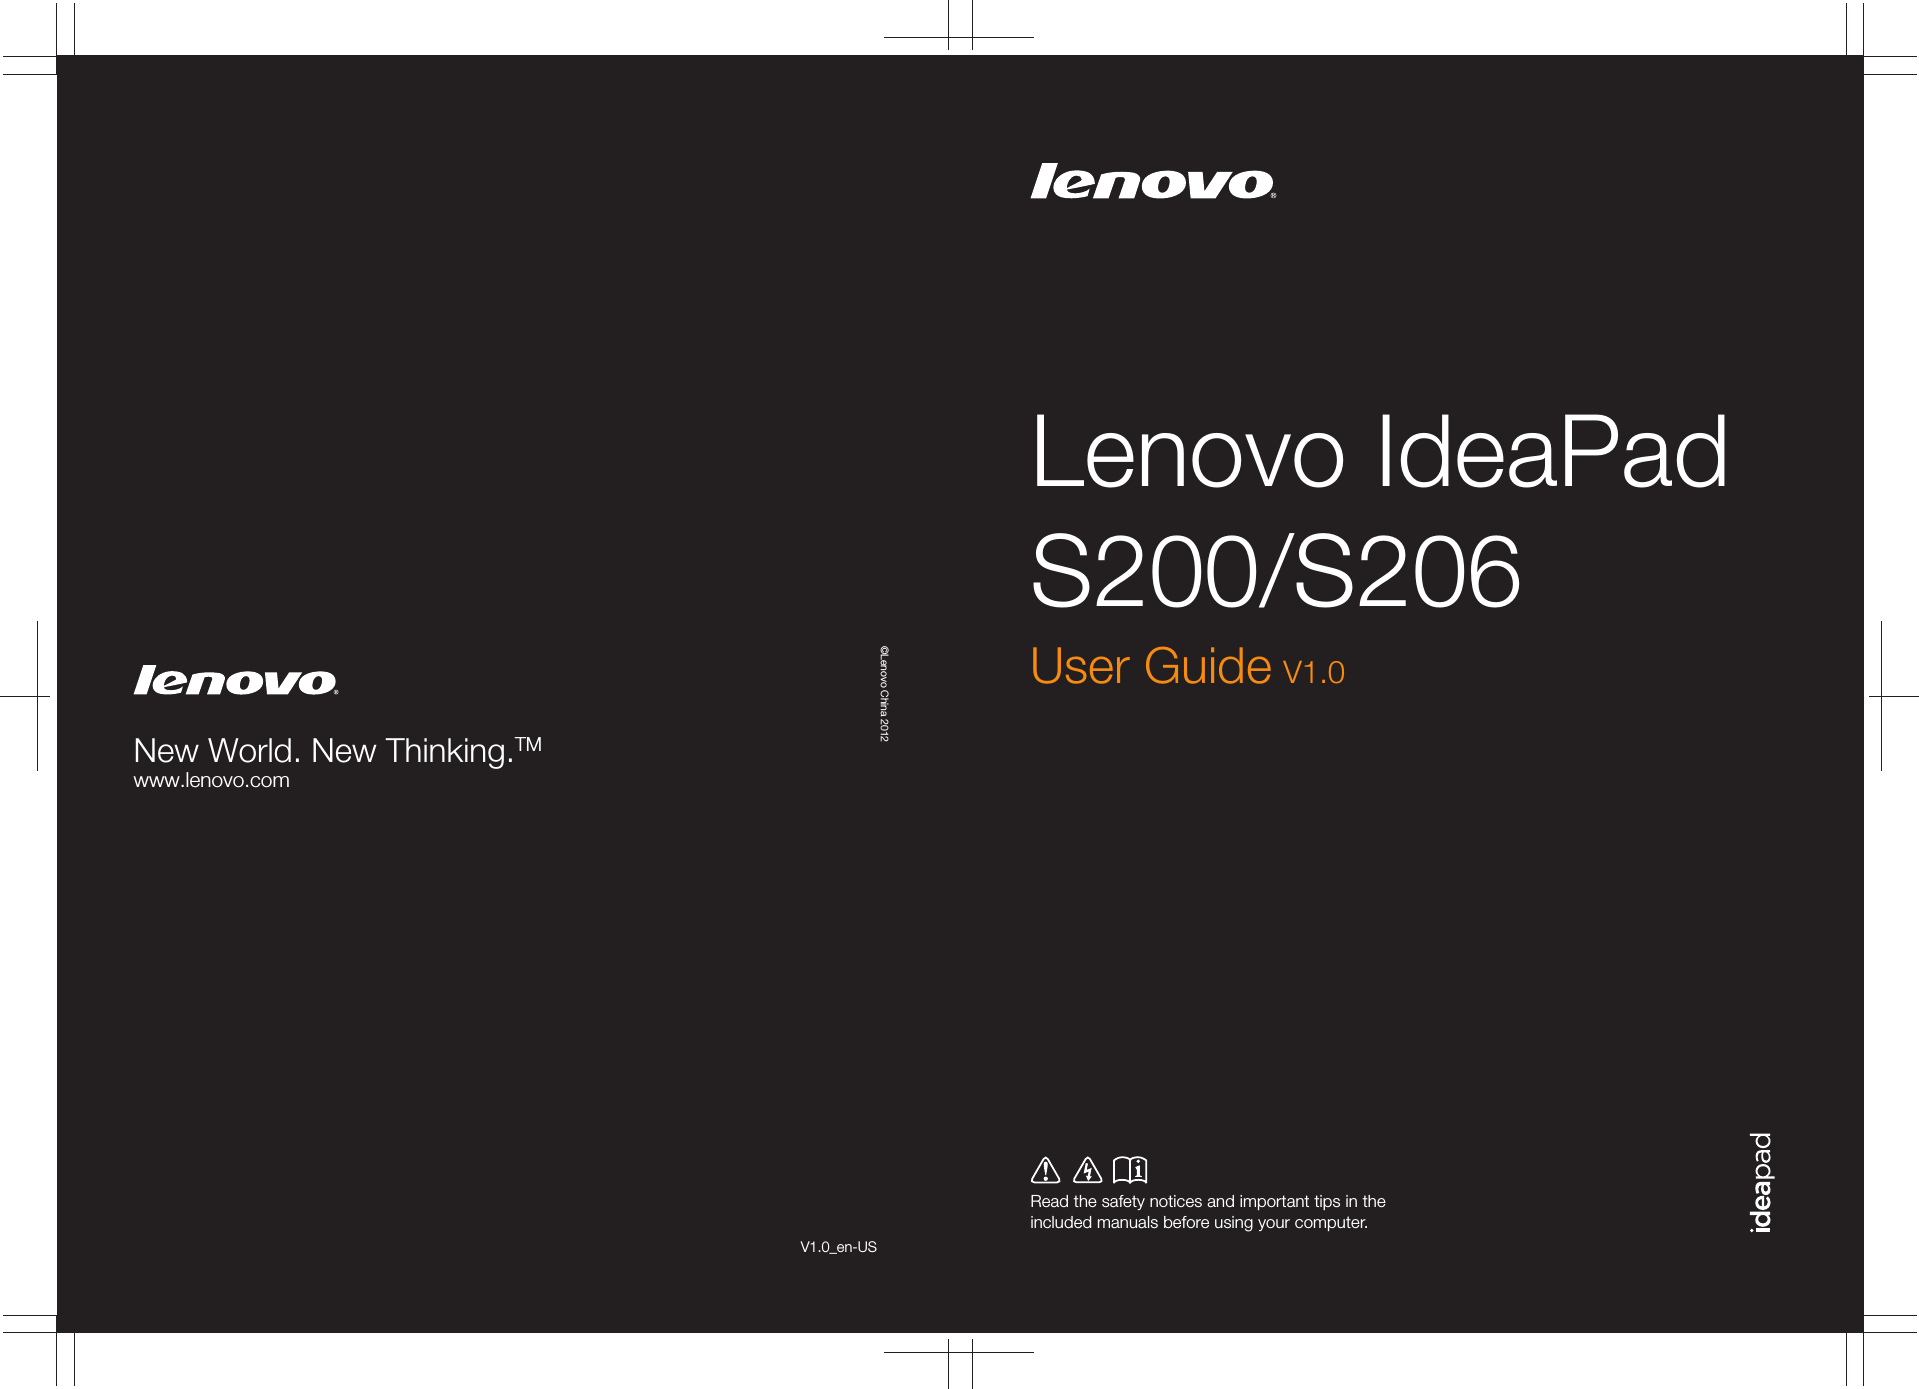 Lenovo IdeaPad S200/S206Read the safety notices and important tips in the included manuals before using your computer.©Lenovo China 2012New World. New Thinking.TMwww.lenovo.comV1.0_en-USUser Guide V1.0